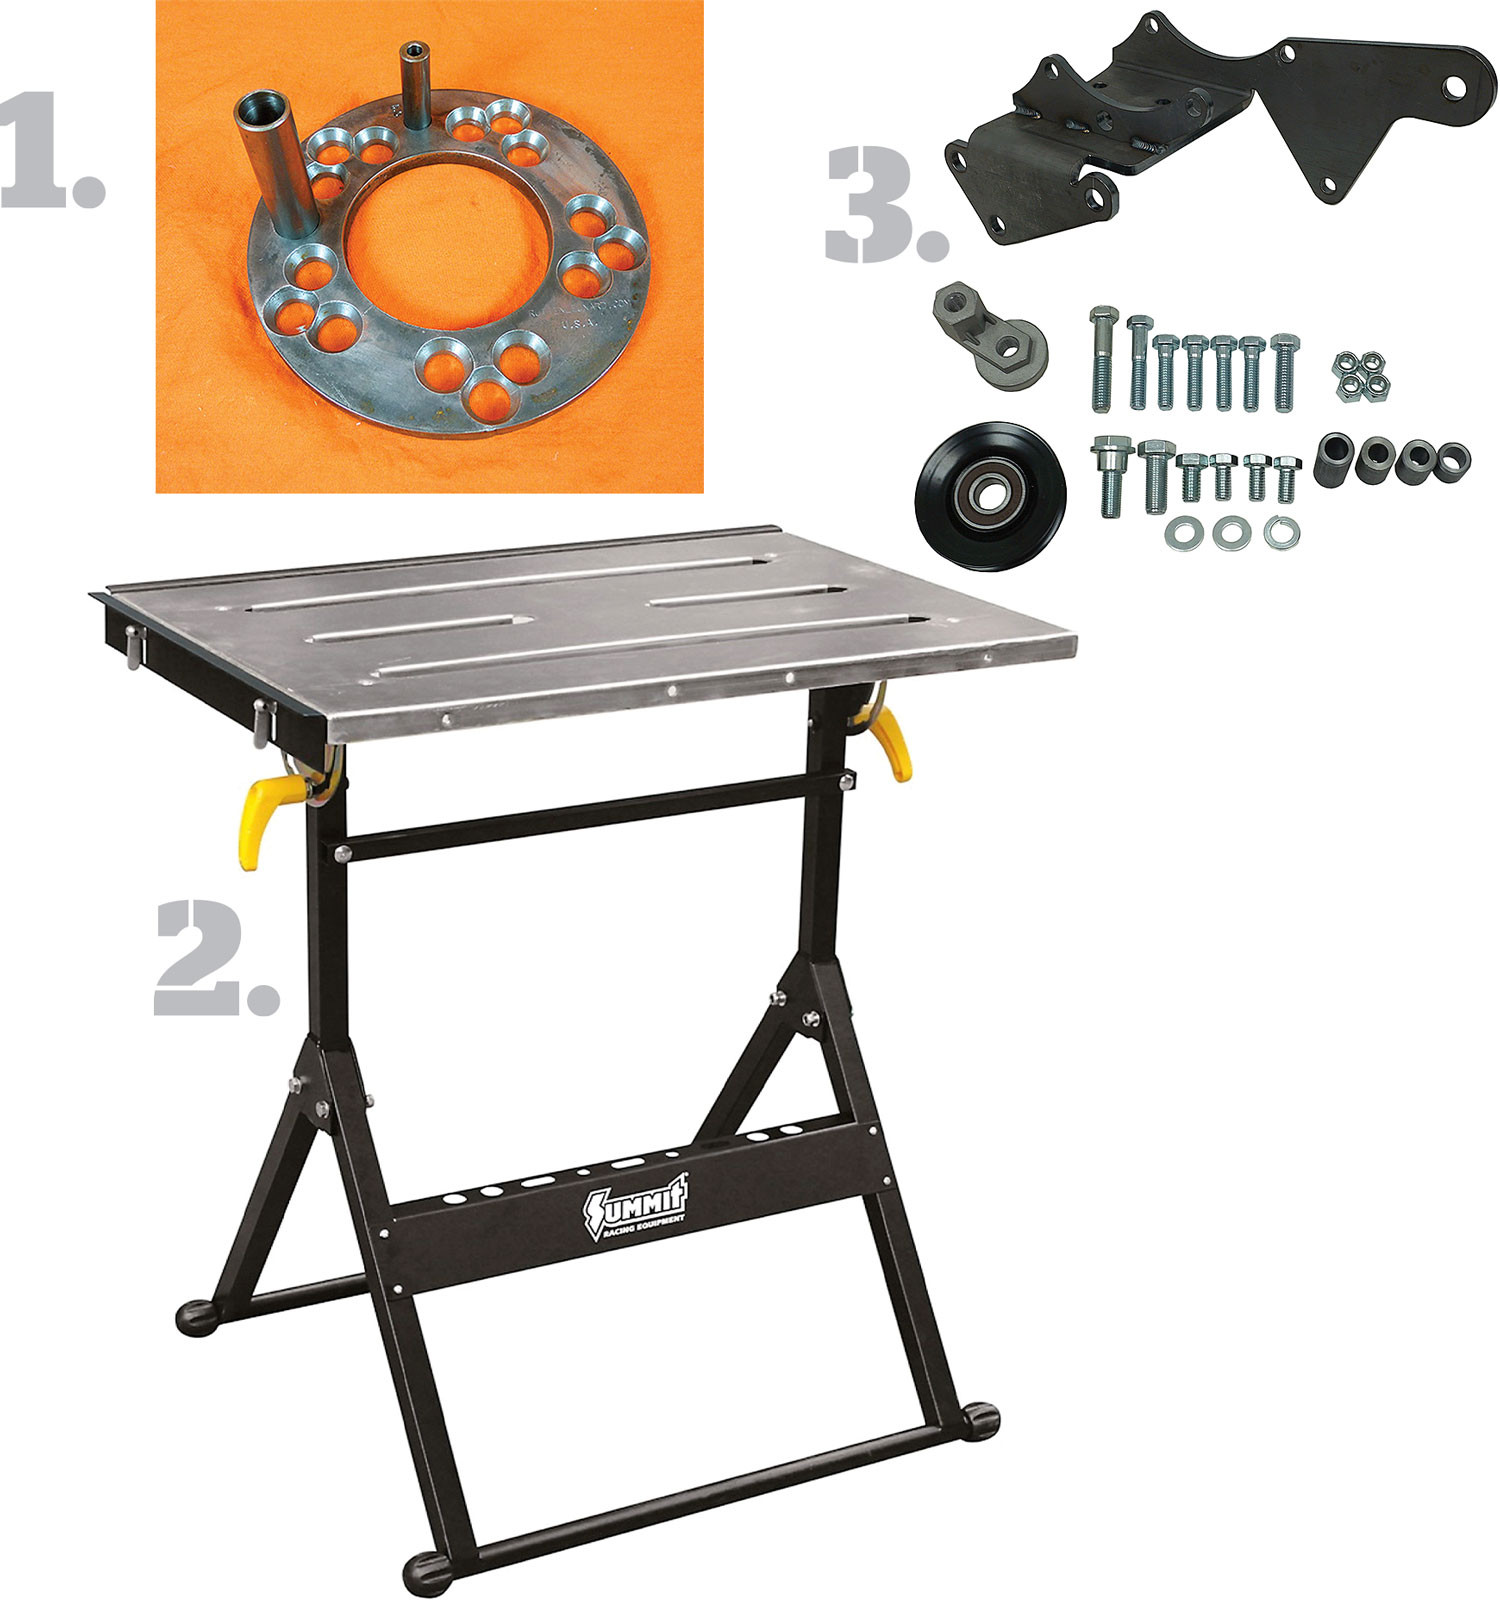 Drill guide, welding table, and Ford brackets